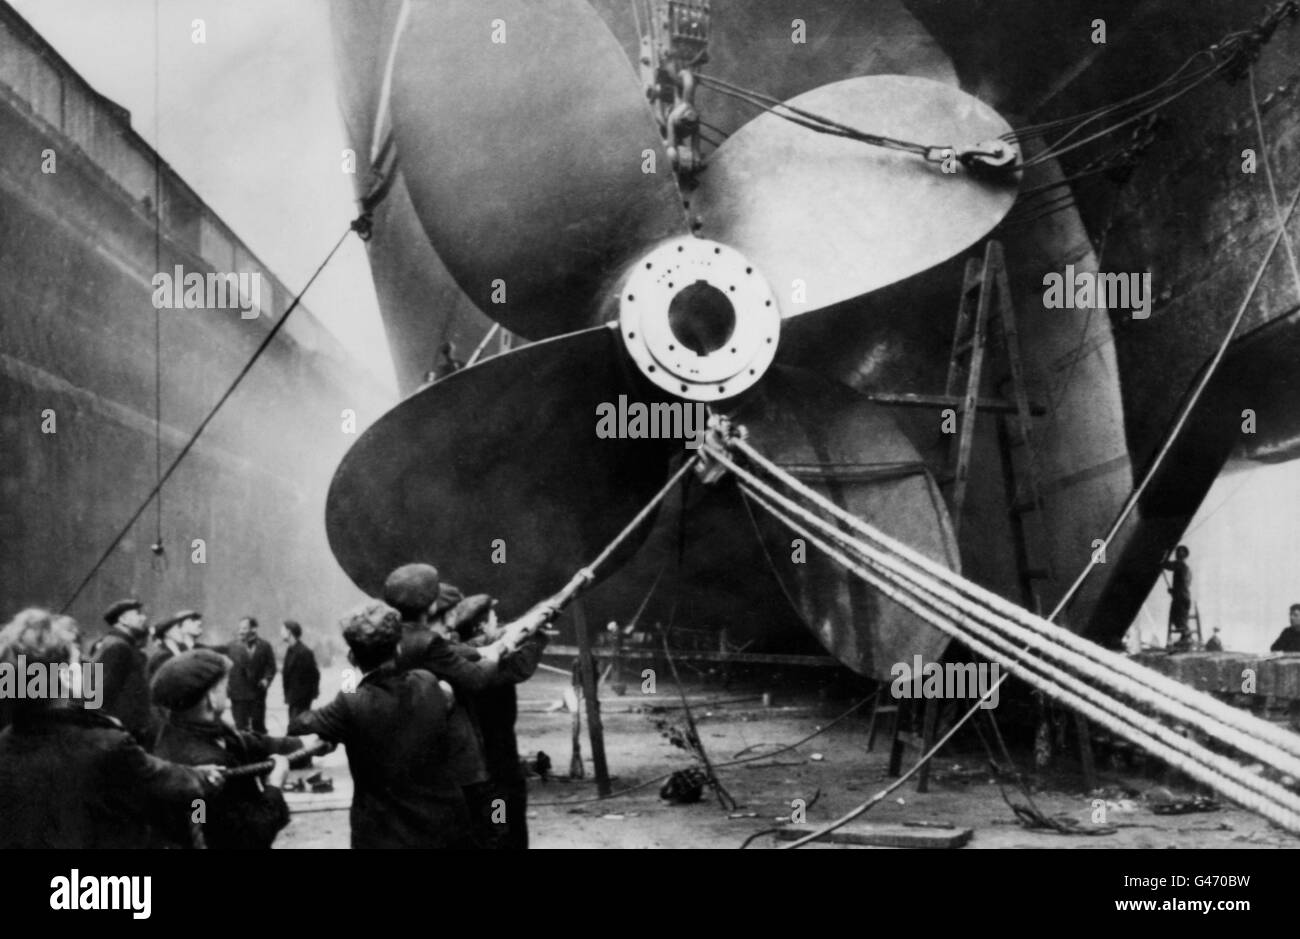 A delicate task as workmen hold carefully to the guide rope as a new propeller of manganese bronze, 19 feet 3 inches in diameter, is fitted to the Cunard liner RMS Mauretania, at Gladstone Dock, Liverpool. Stock Photo